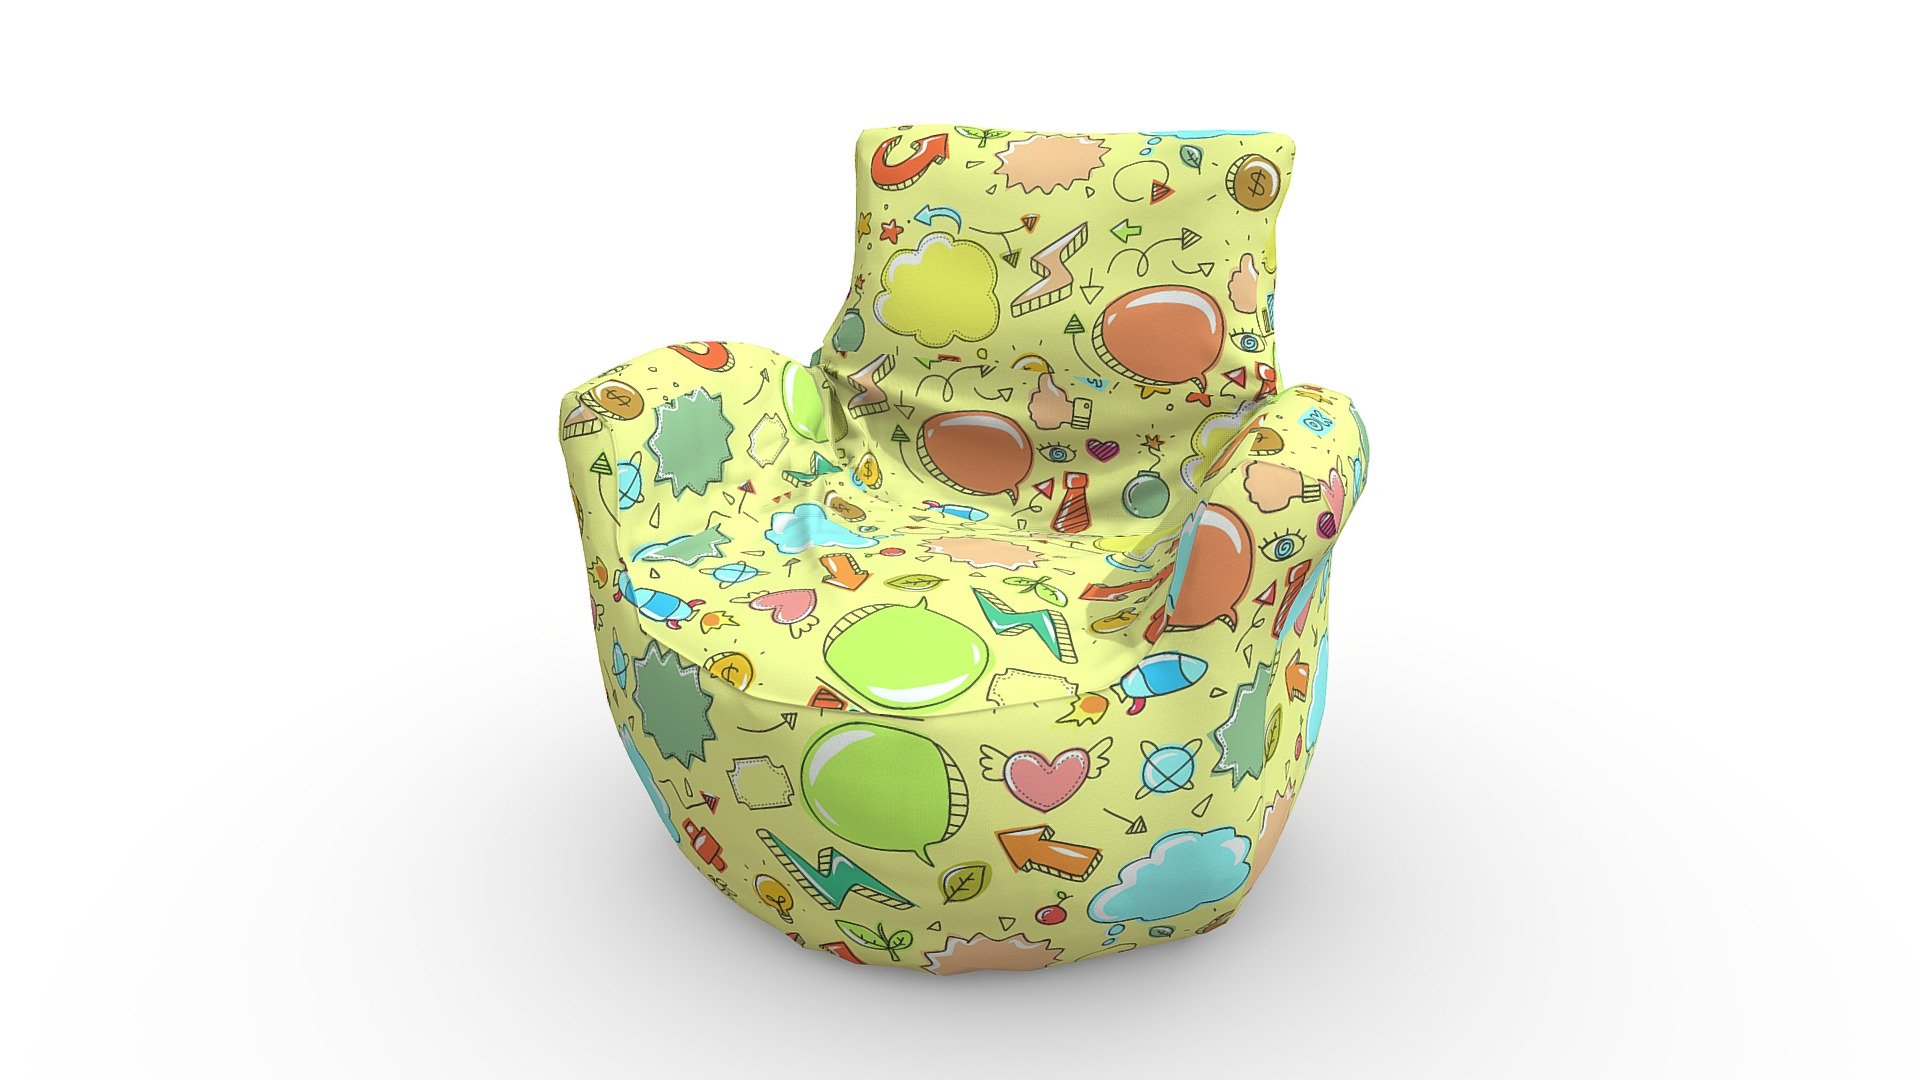 Bean Bag. Inside out brings to you highly detailed, optimized, with PBR materials. Can be used for any project and platform. AR, VR, Anroid, IOS, PC, etc. All maps albedo, normal, roughness, aoc, metallic and height are perfectly created with love and care and optimized for all platforms. Ready to be used in unity or unreal or any other engine.

*All textures are included in the package.

Features: - PBR validated - Super optimized 3D models - HD textures to boost every single detail - VR ready - AR ready - 4k Textures - Arm Chair Bean Bag Kids - Buy Royalty Free 3D model by Inside Out Art (@ranajitdas) 3d model